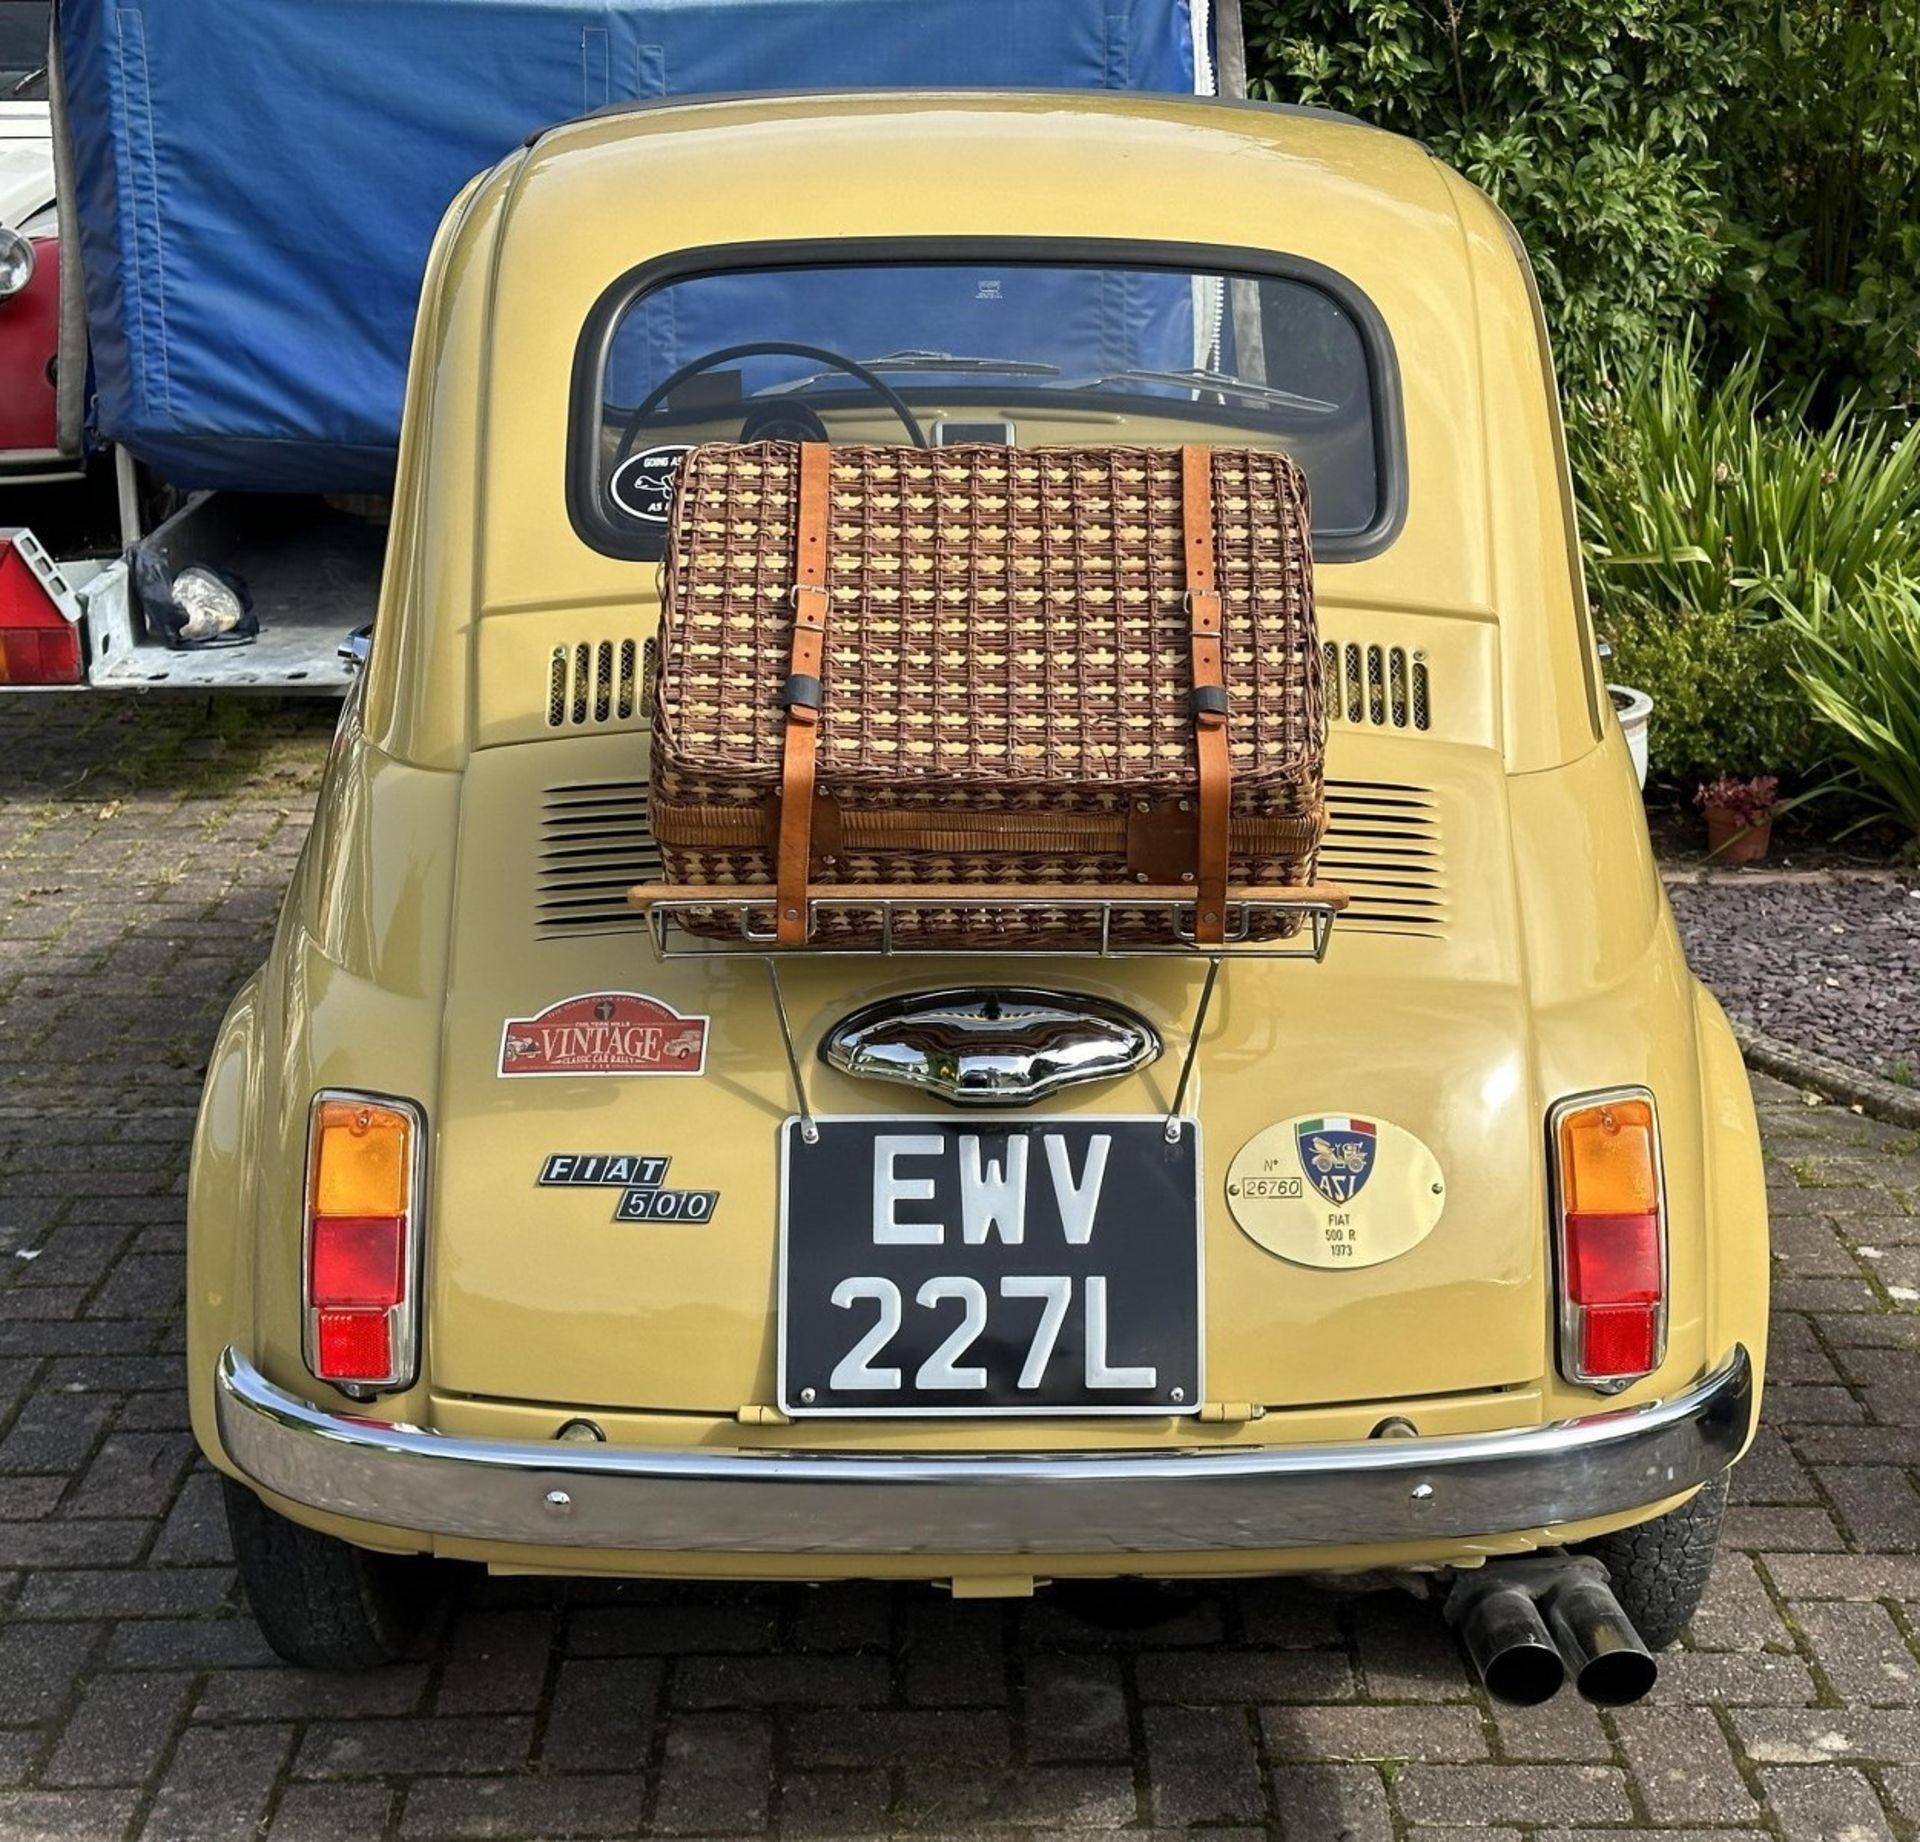 ***Being sold without reserve*** 1973 Fiat 500F Registration number EWV 227LChassis number - Image 9 of 51